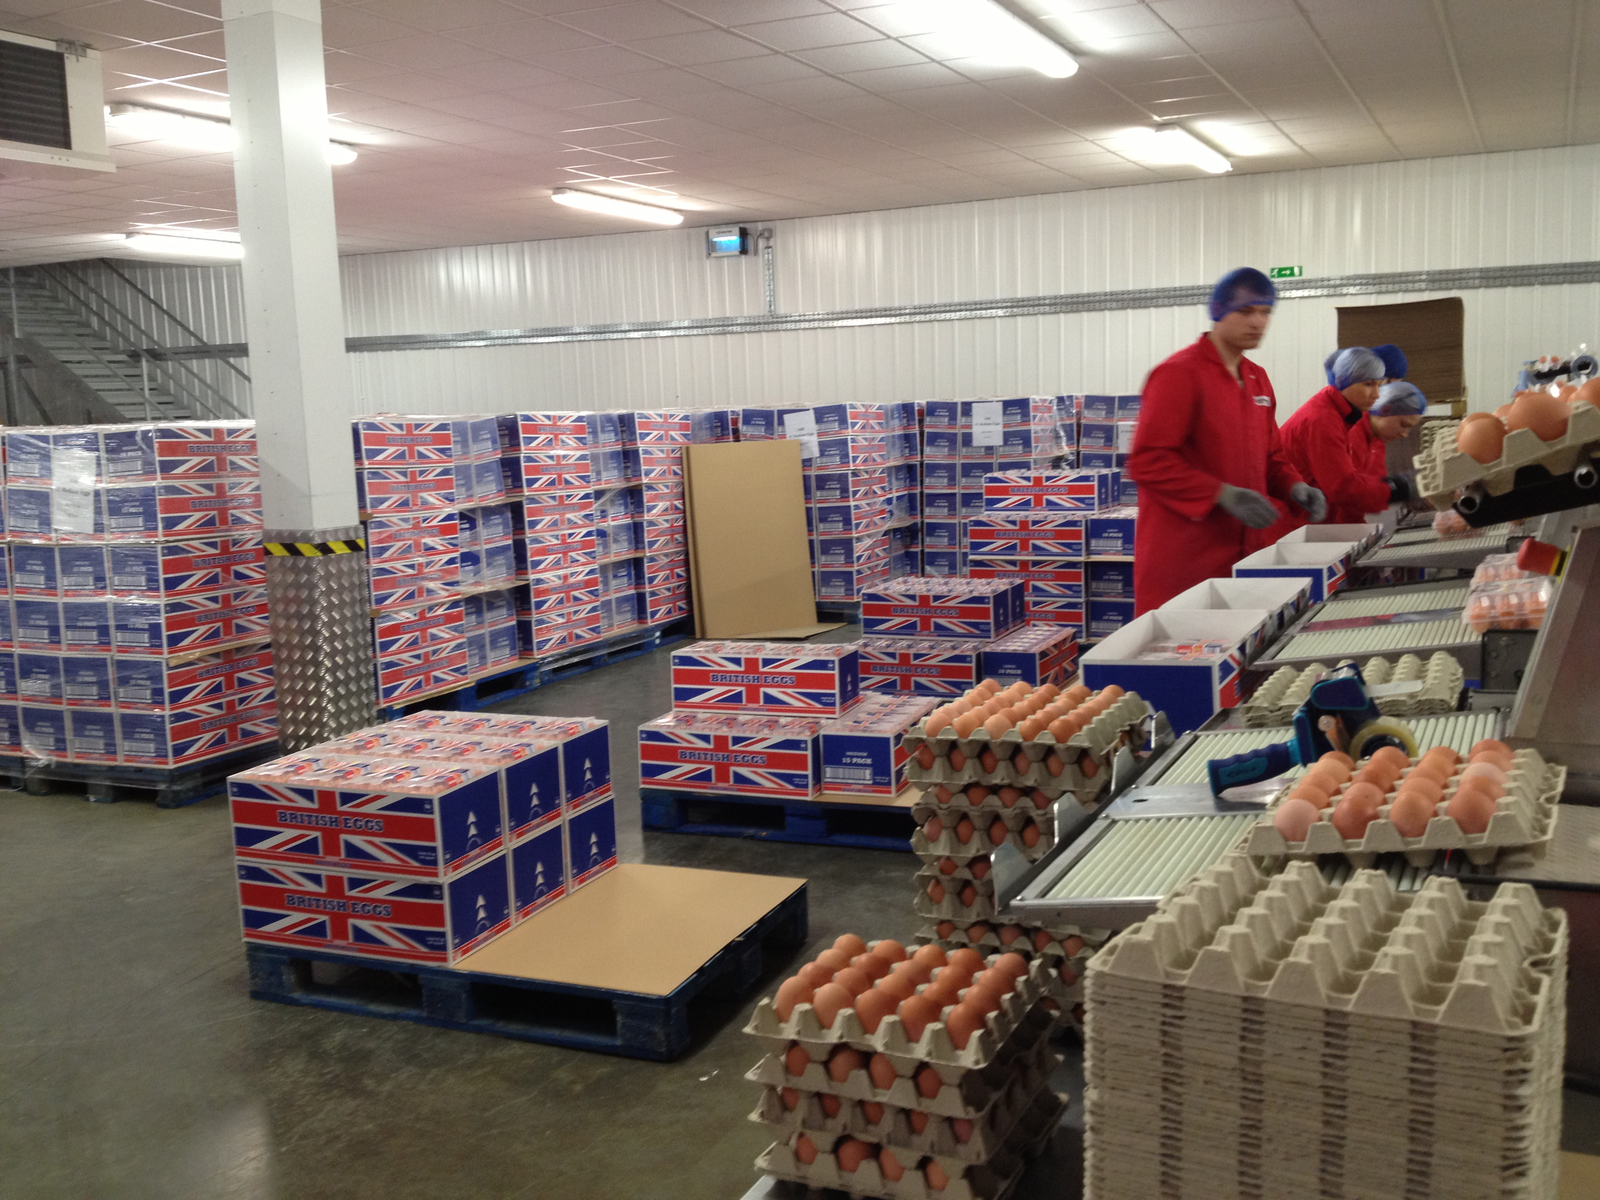 Large UK poultry and feed producer signs deal with CHEP